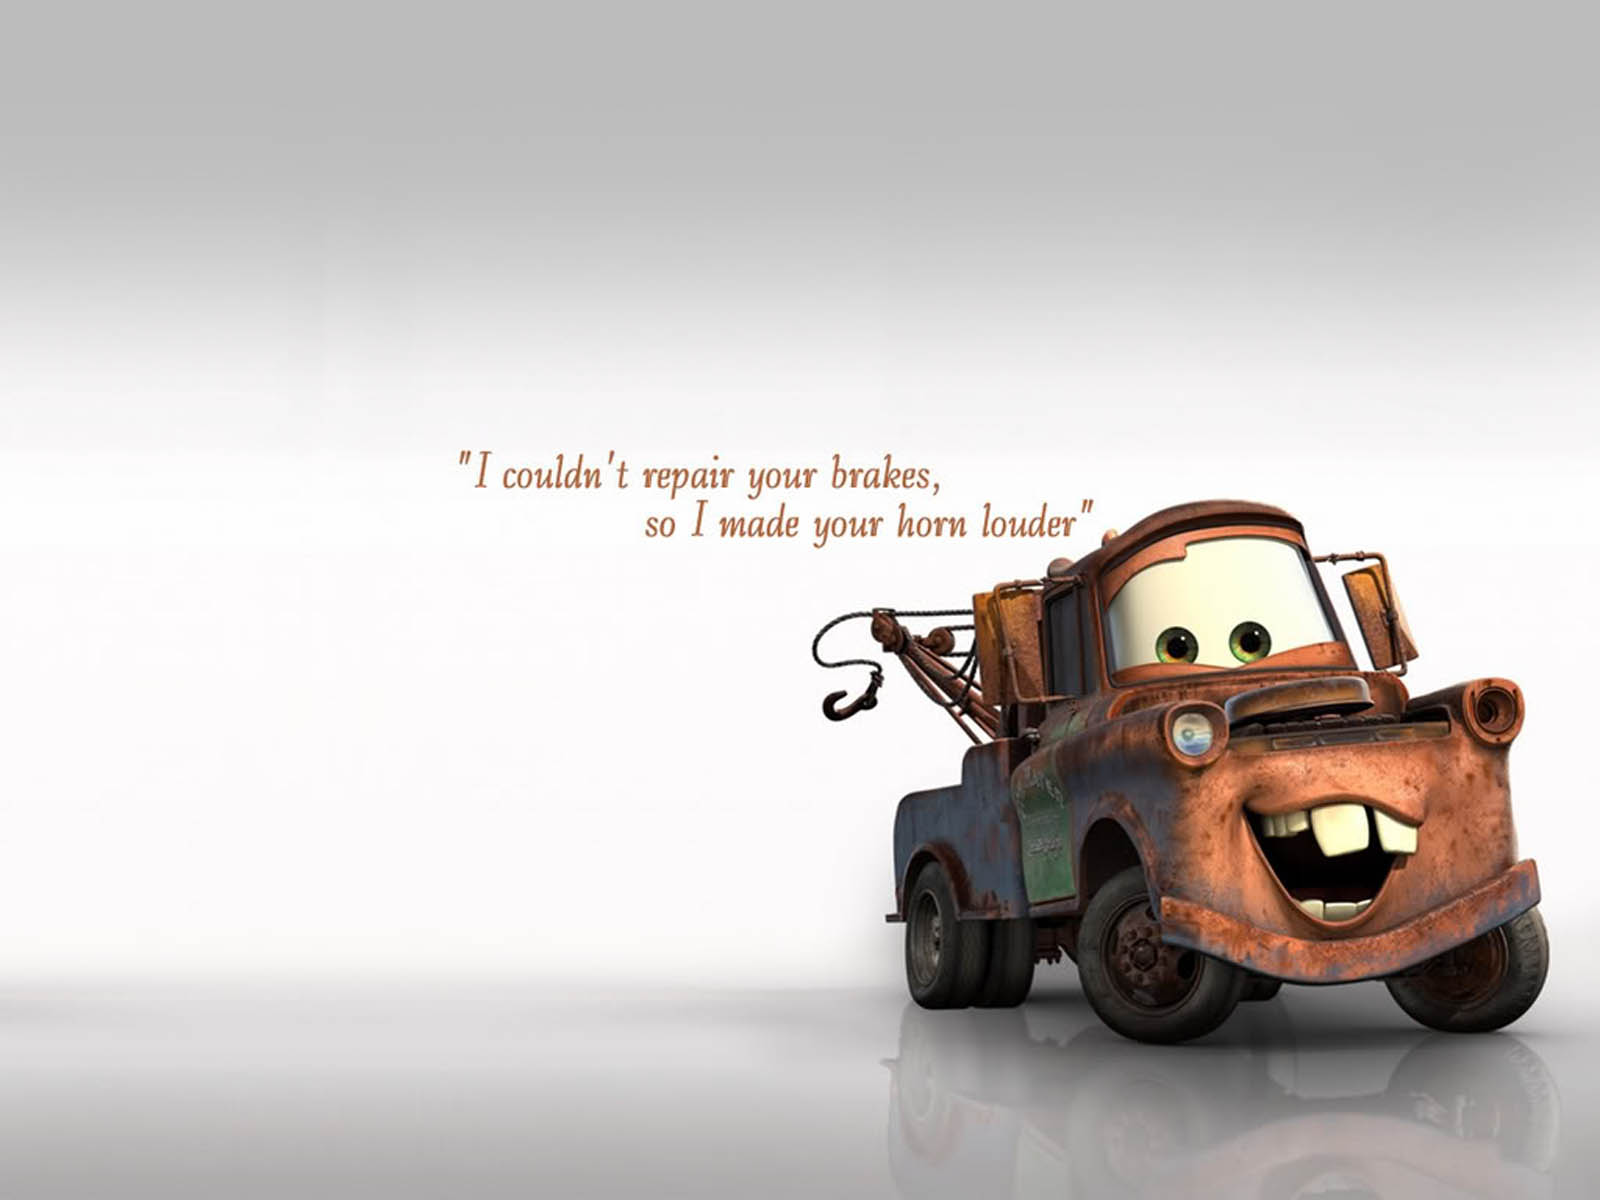 Cute Love Quote   Wallpaper High Definition High Quality Widescreen 1600x1200